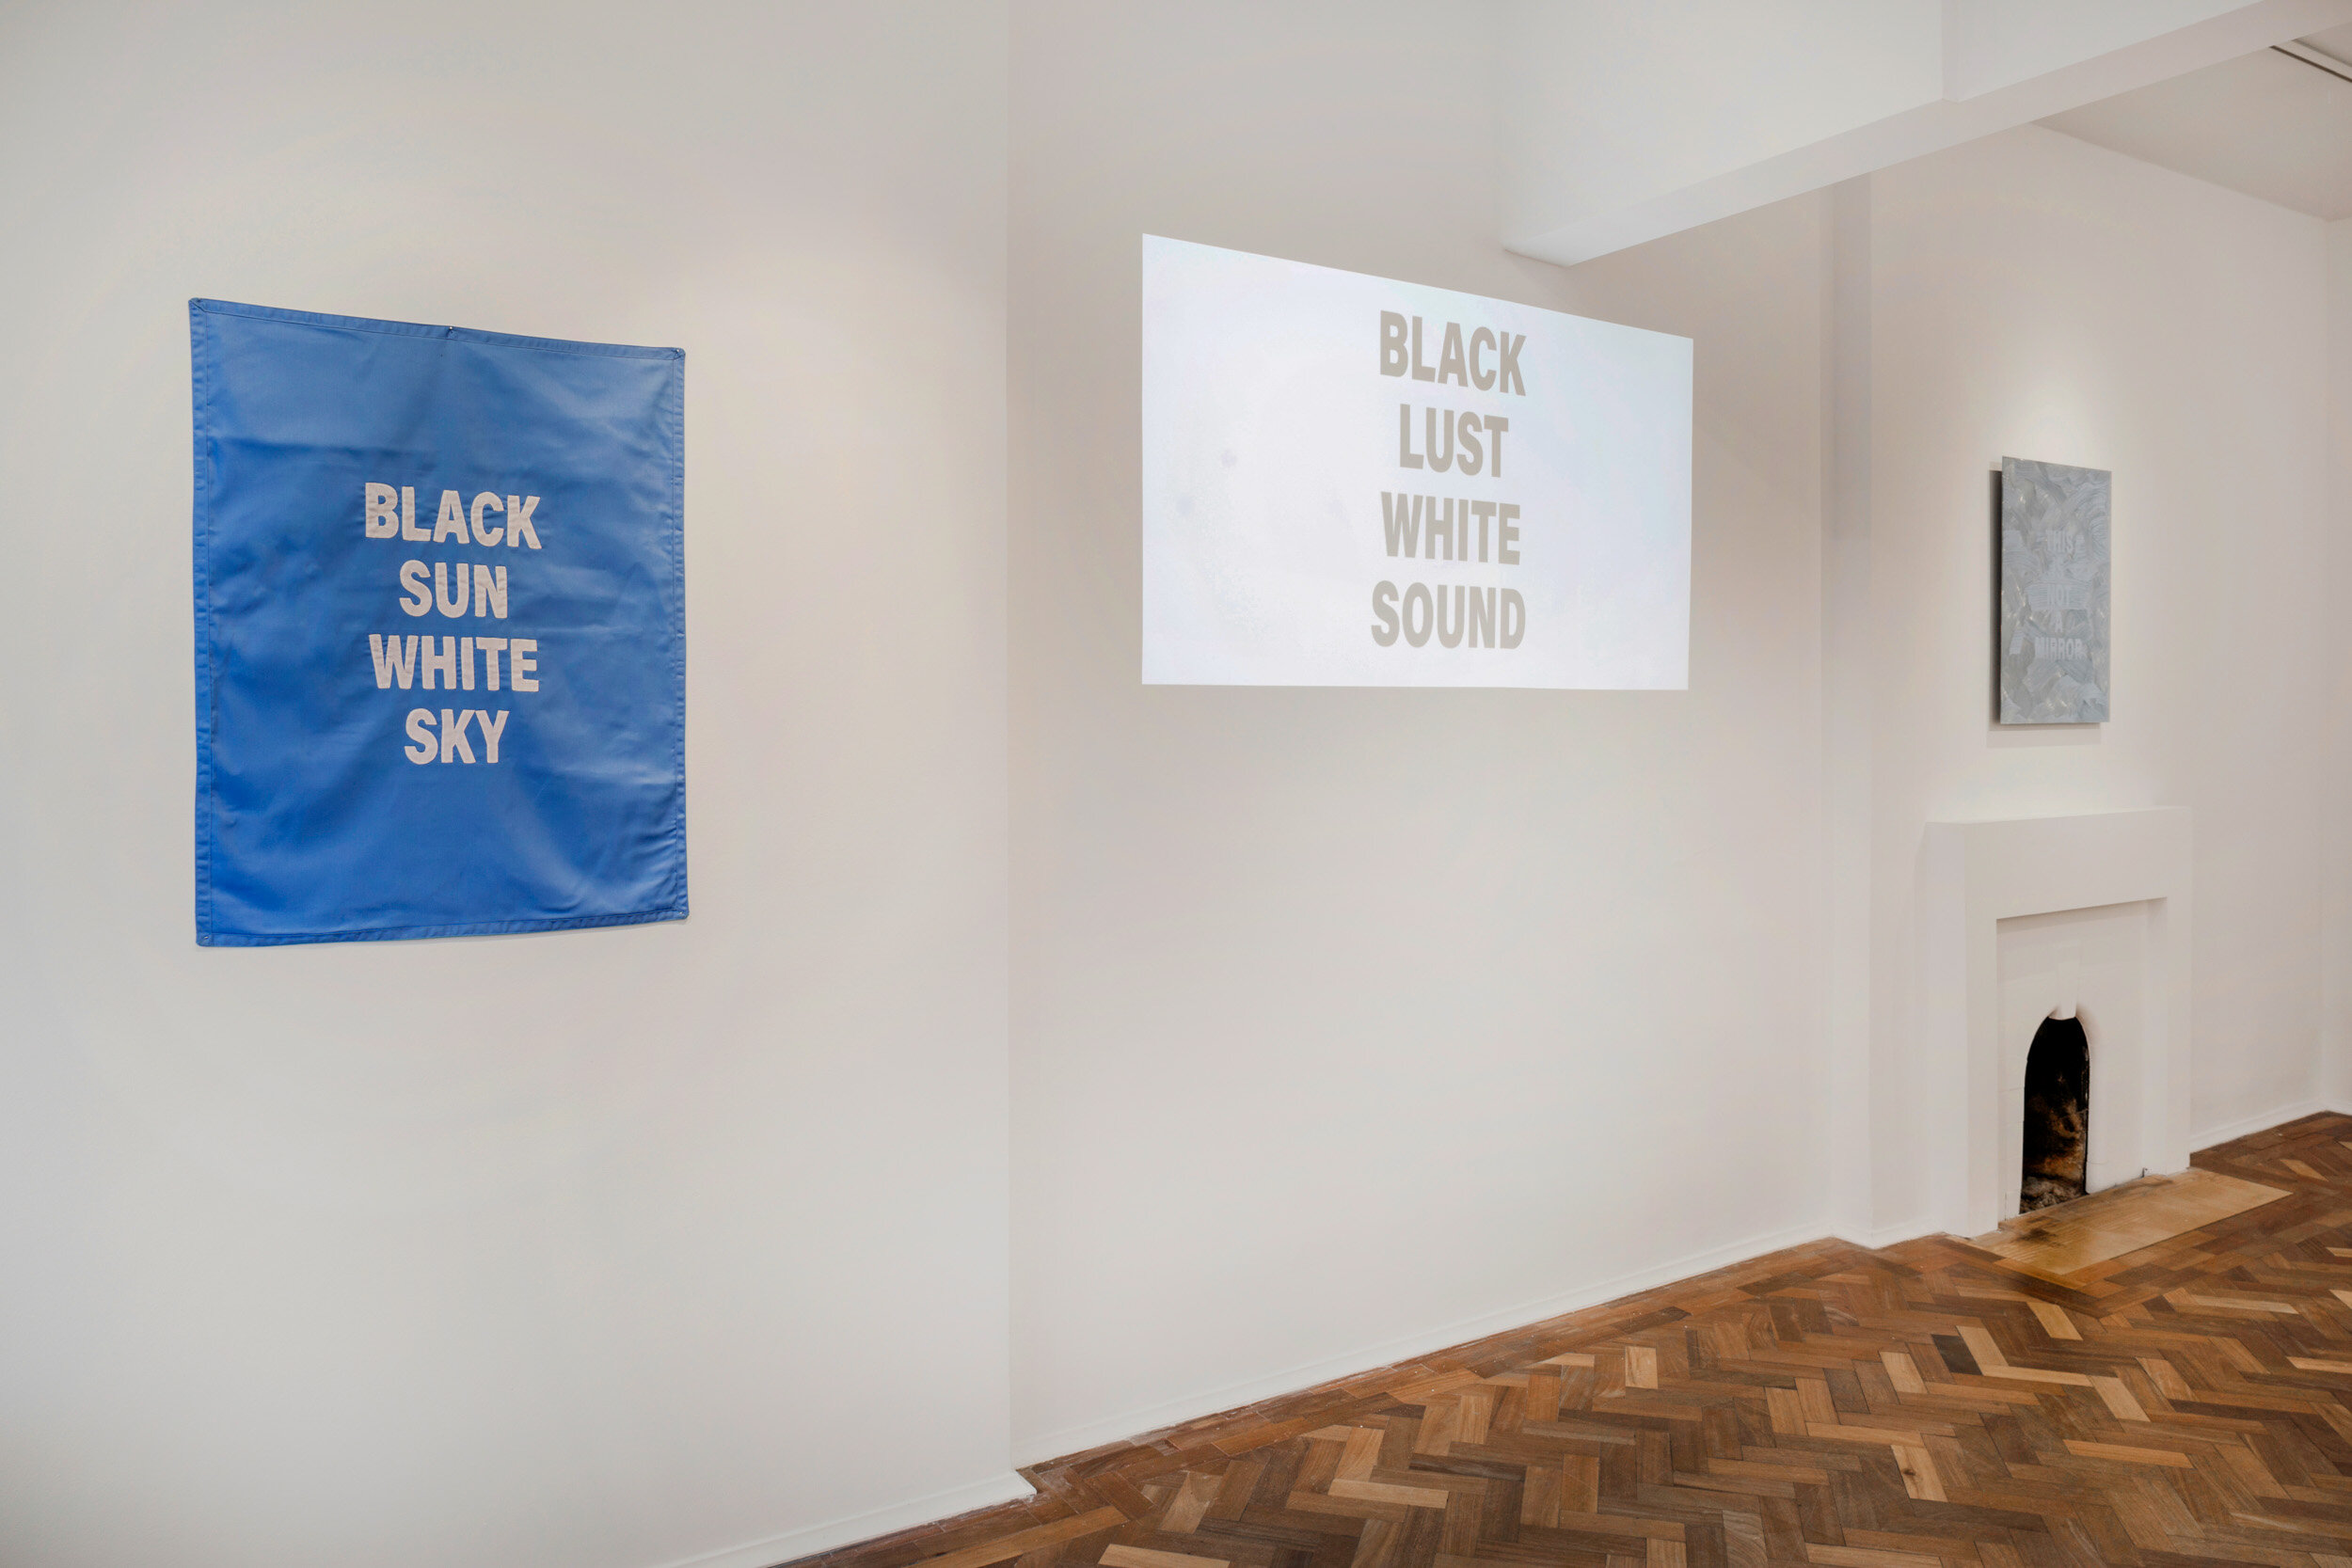  The poems are expressed or manifested in any possible form depending on the exhibition space, displayed on video, inscribed on paper, posters, books or mirrors, sewn, drawn, or spoken, printed on T-shirts and worn, performed rhythmically in morse co